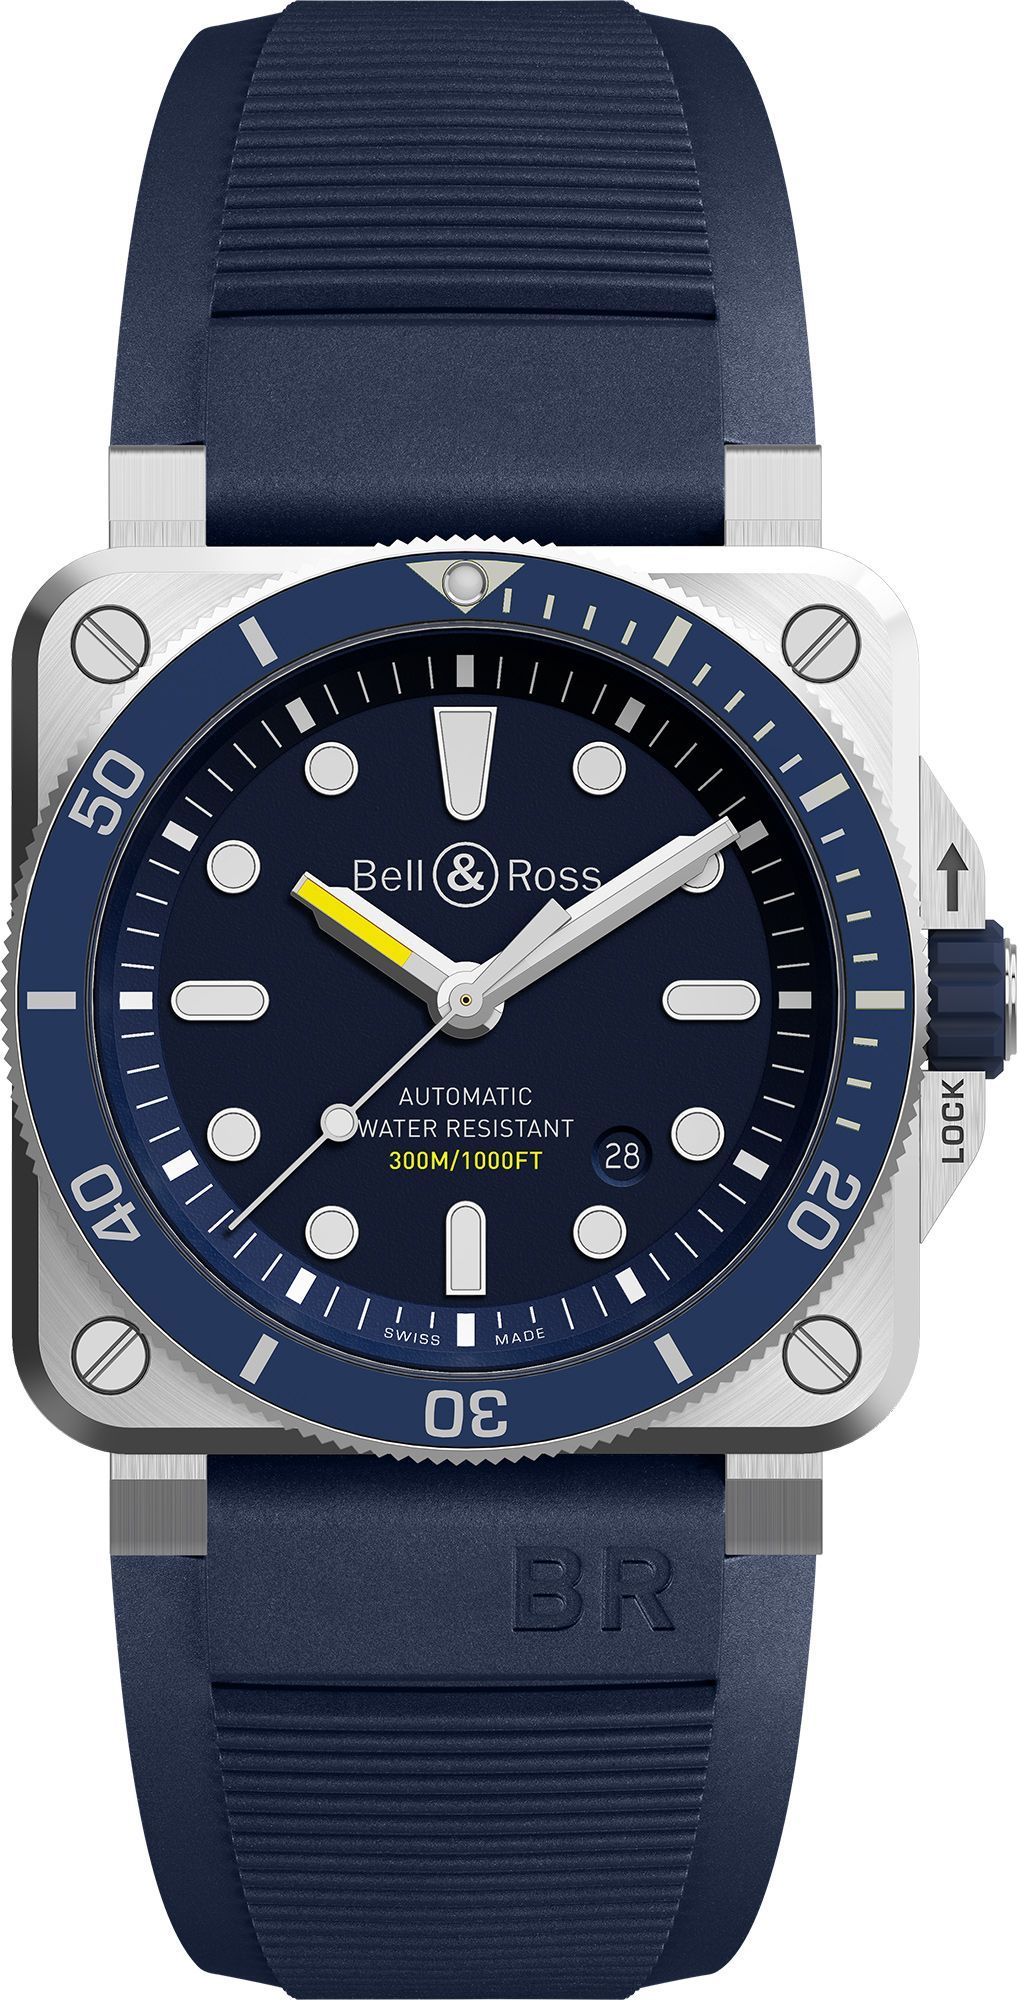 Bell & Ross Instruments BR 03 Diver Blue Dial 42 mm Automatic Watch For Men - 1